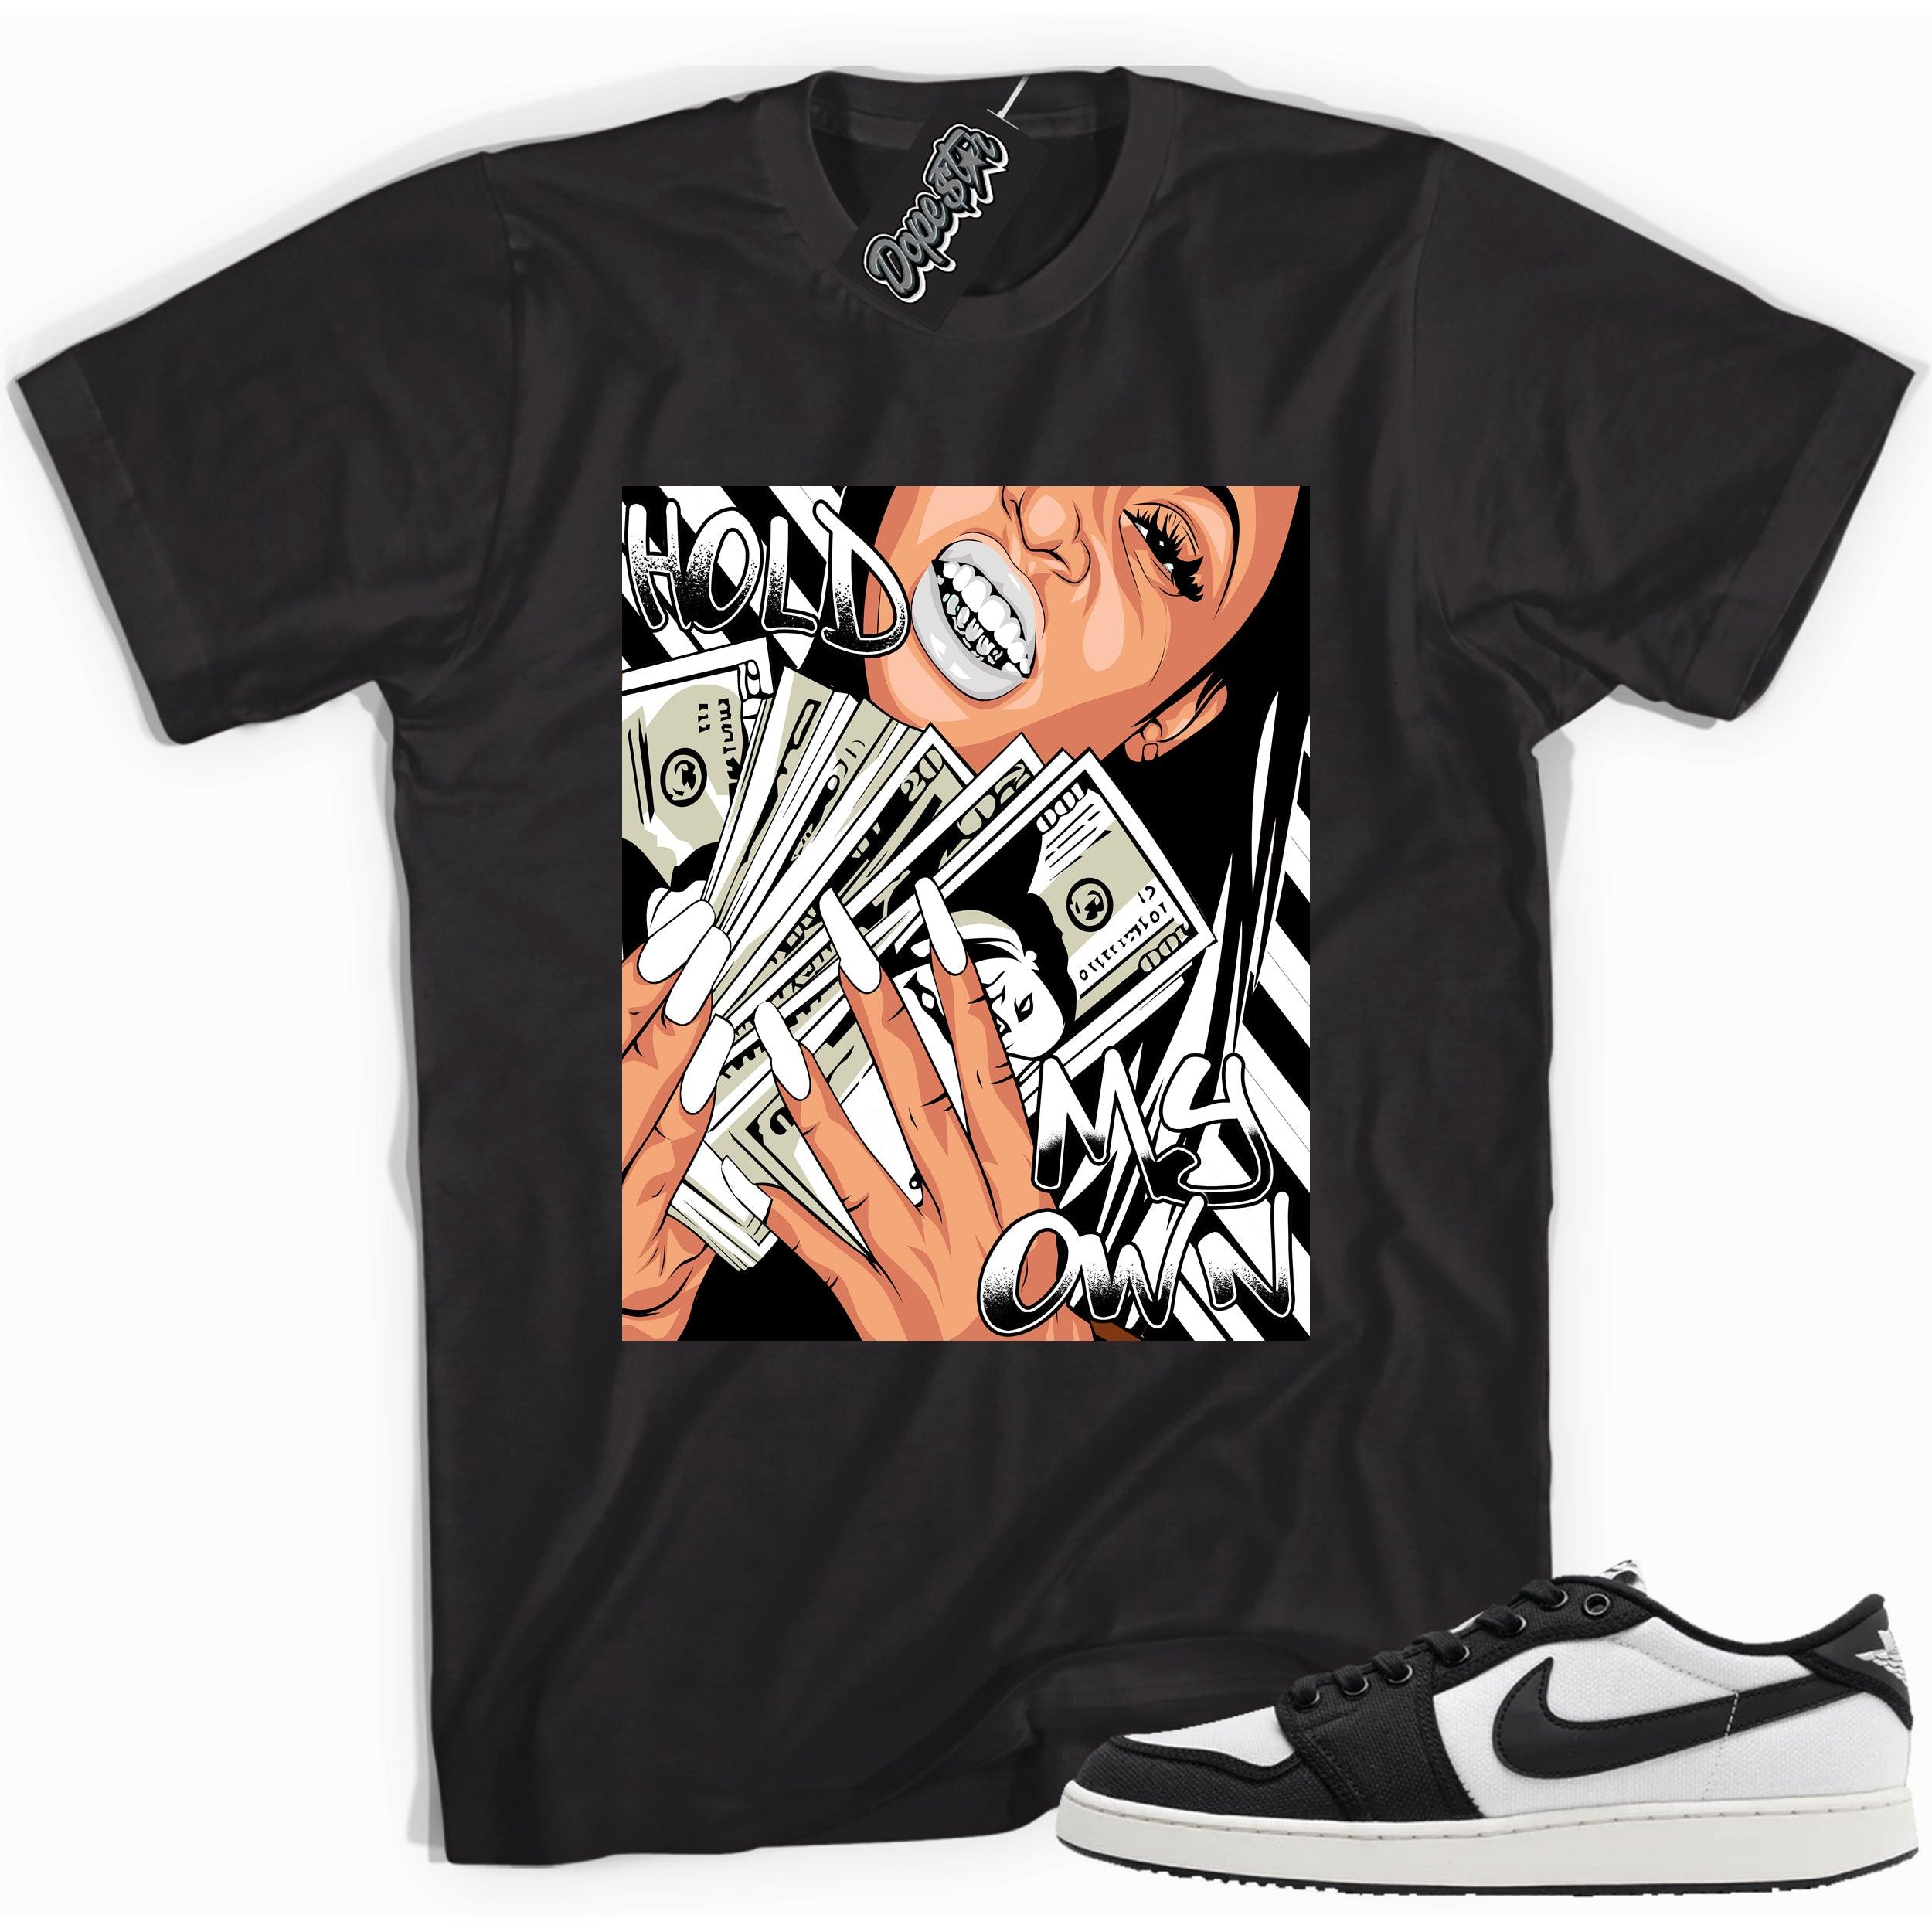 Cool black graphic tee with 'hold my own' print, that perfectly matches Air Jordan 1 Retro Ajko Low Black & White sneakers.